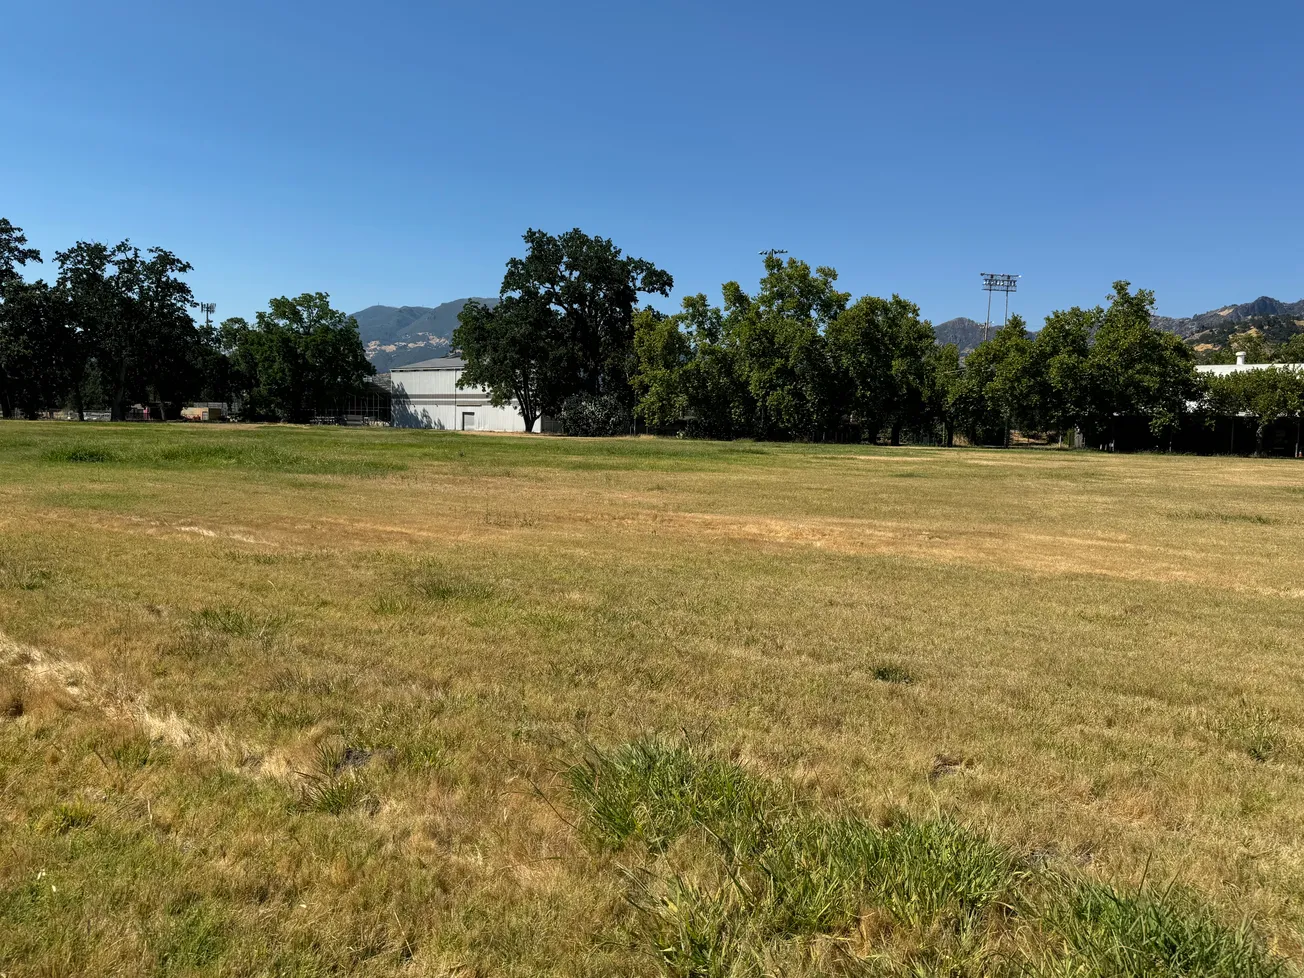 Lawn rental likely to be Calistoga’s first official  use of Fairgrounds